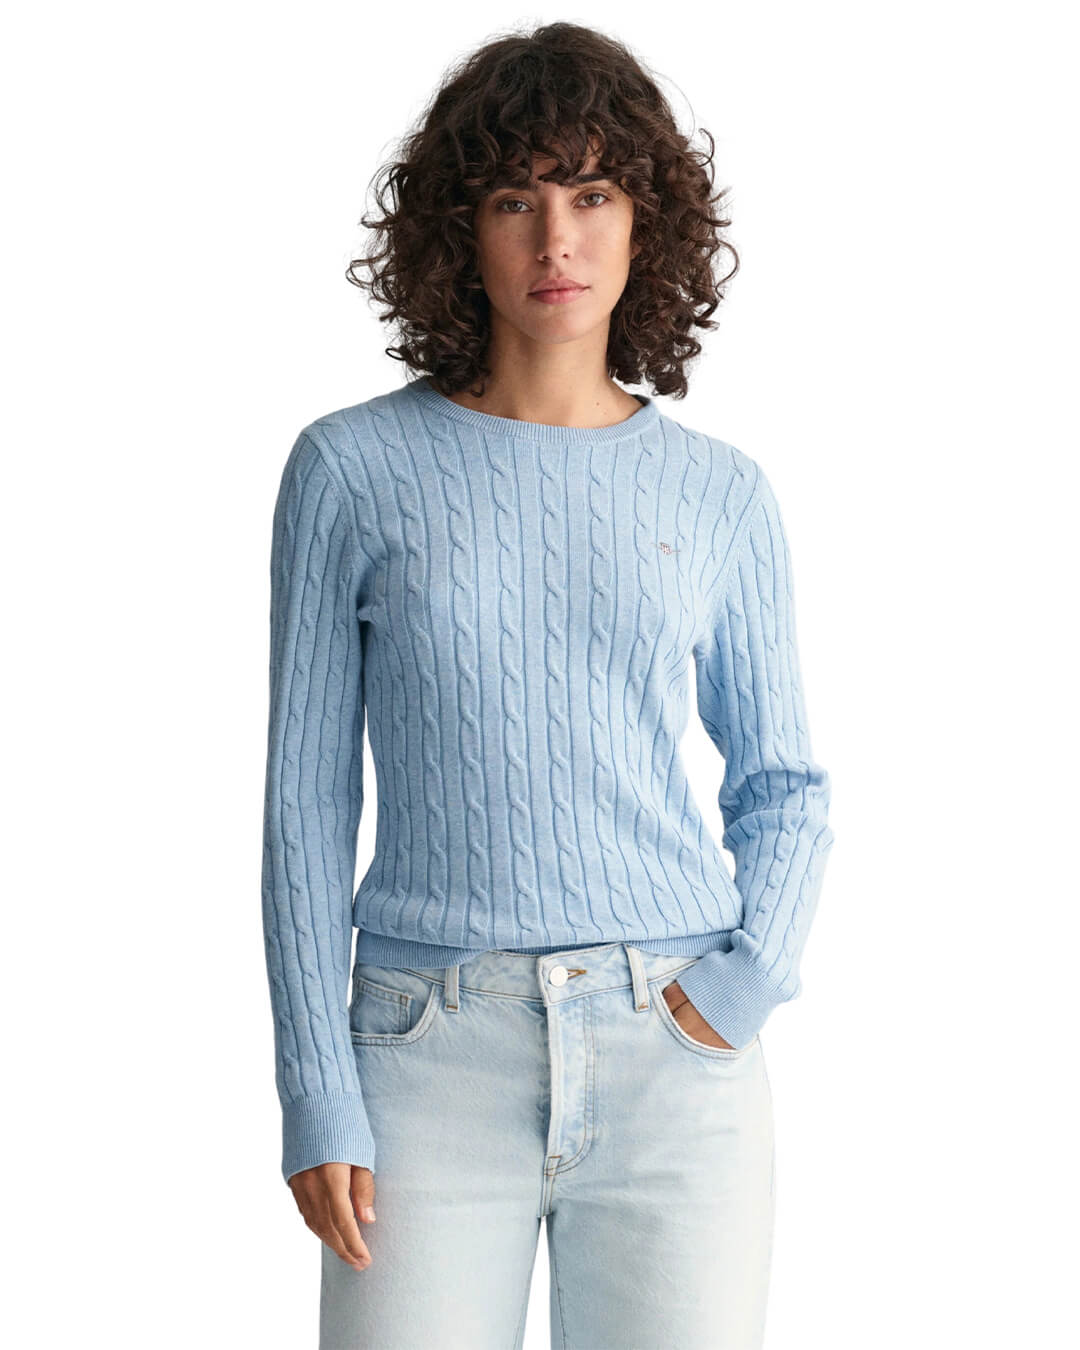 Gant Jumpers Gant Sky Blue Stretch Cotton Cable Knit Crew Neck Sweater